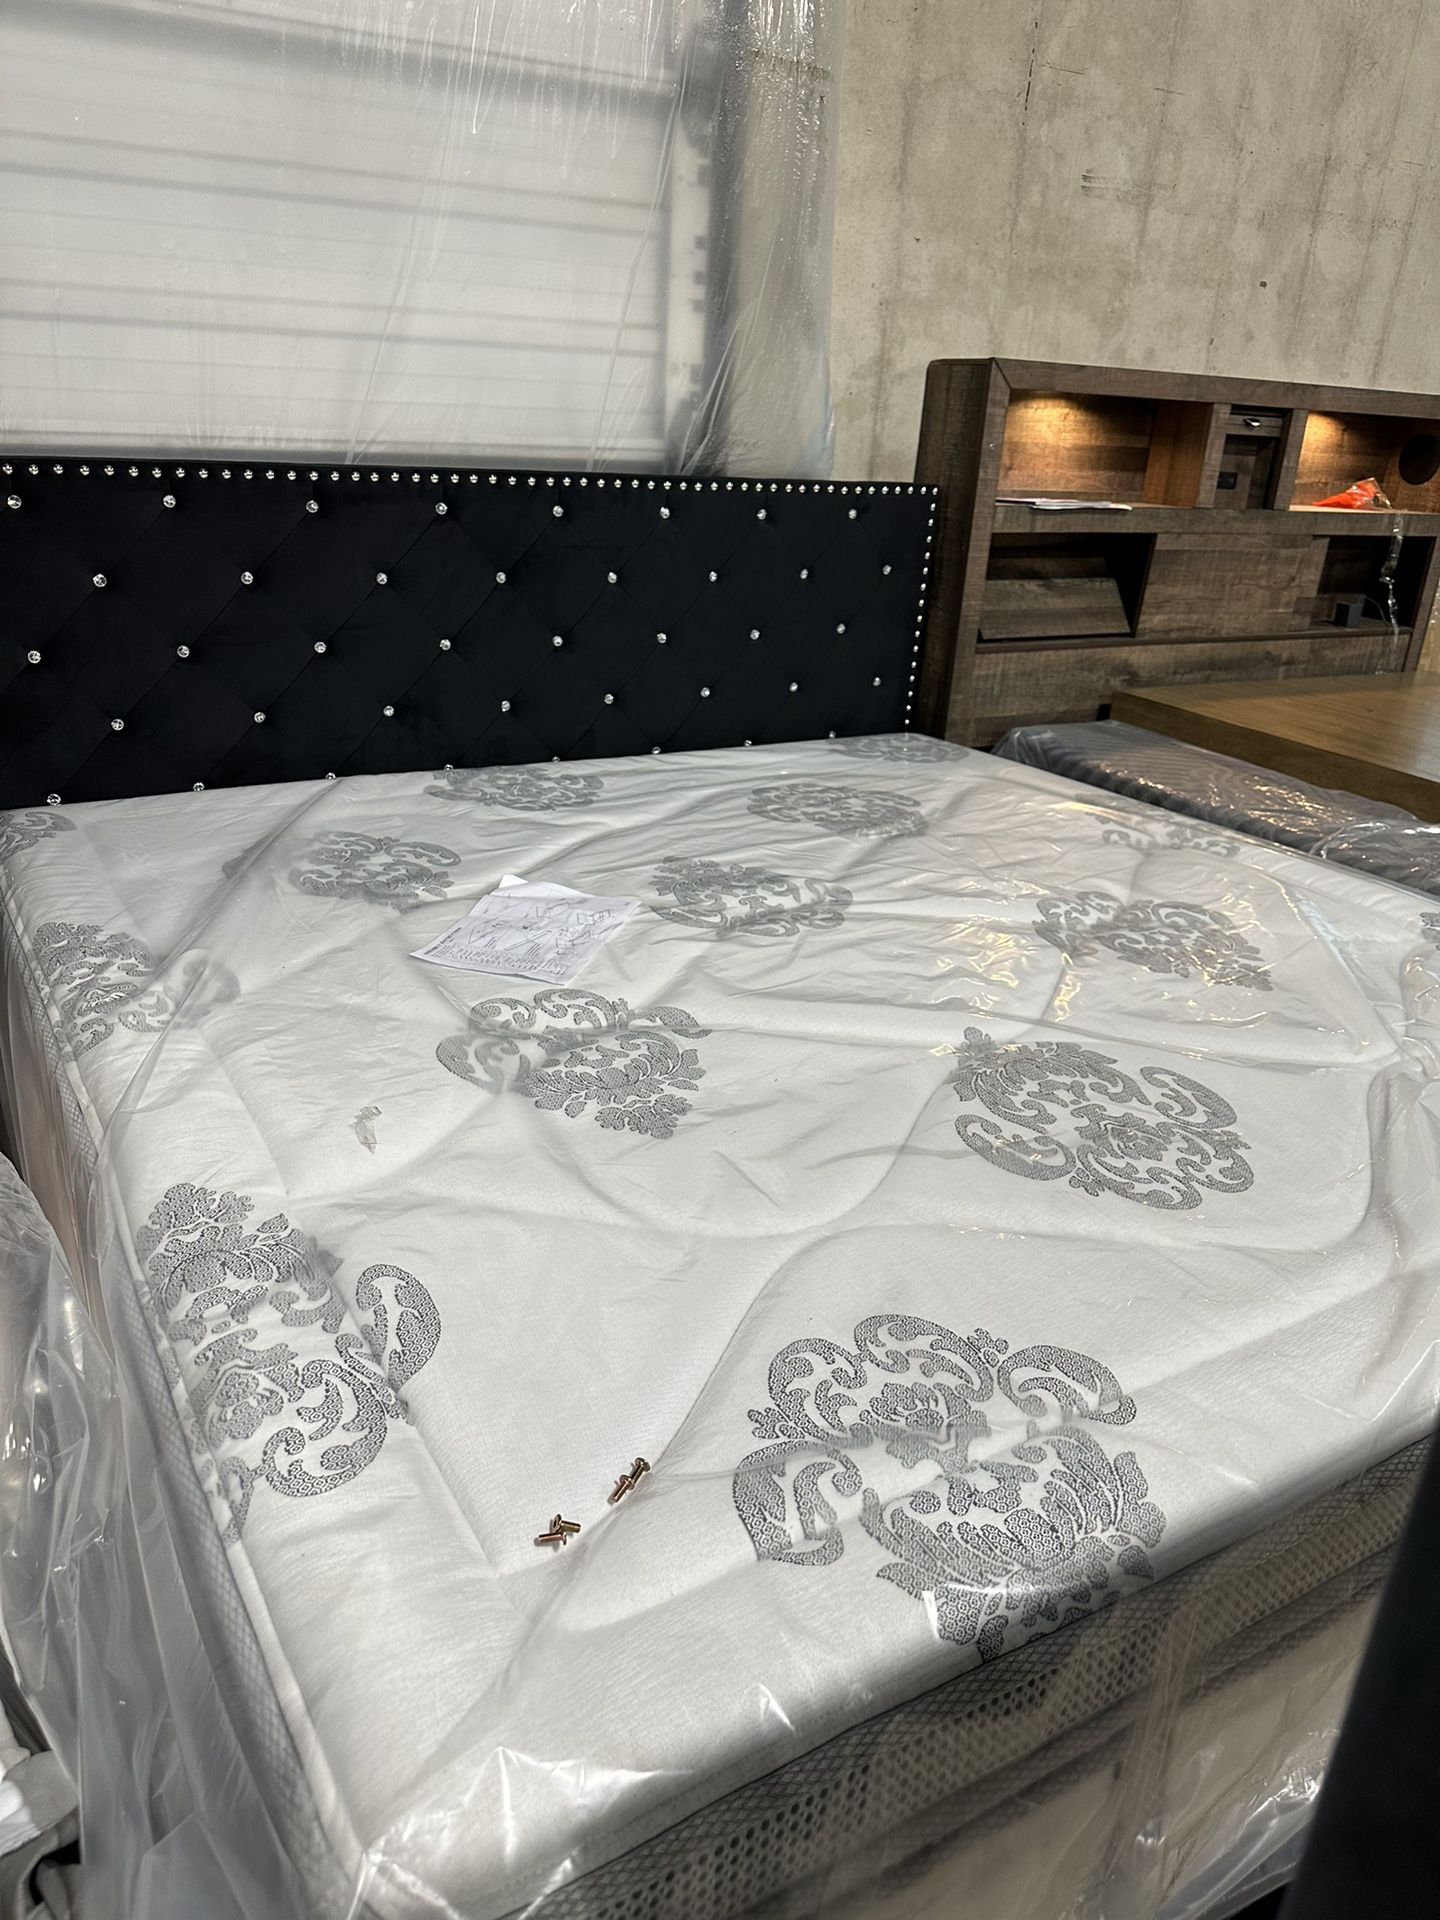 New Queen Size Bed With Promo Mattress And Free Delivery , Accepting Cash On Delivery 